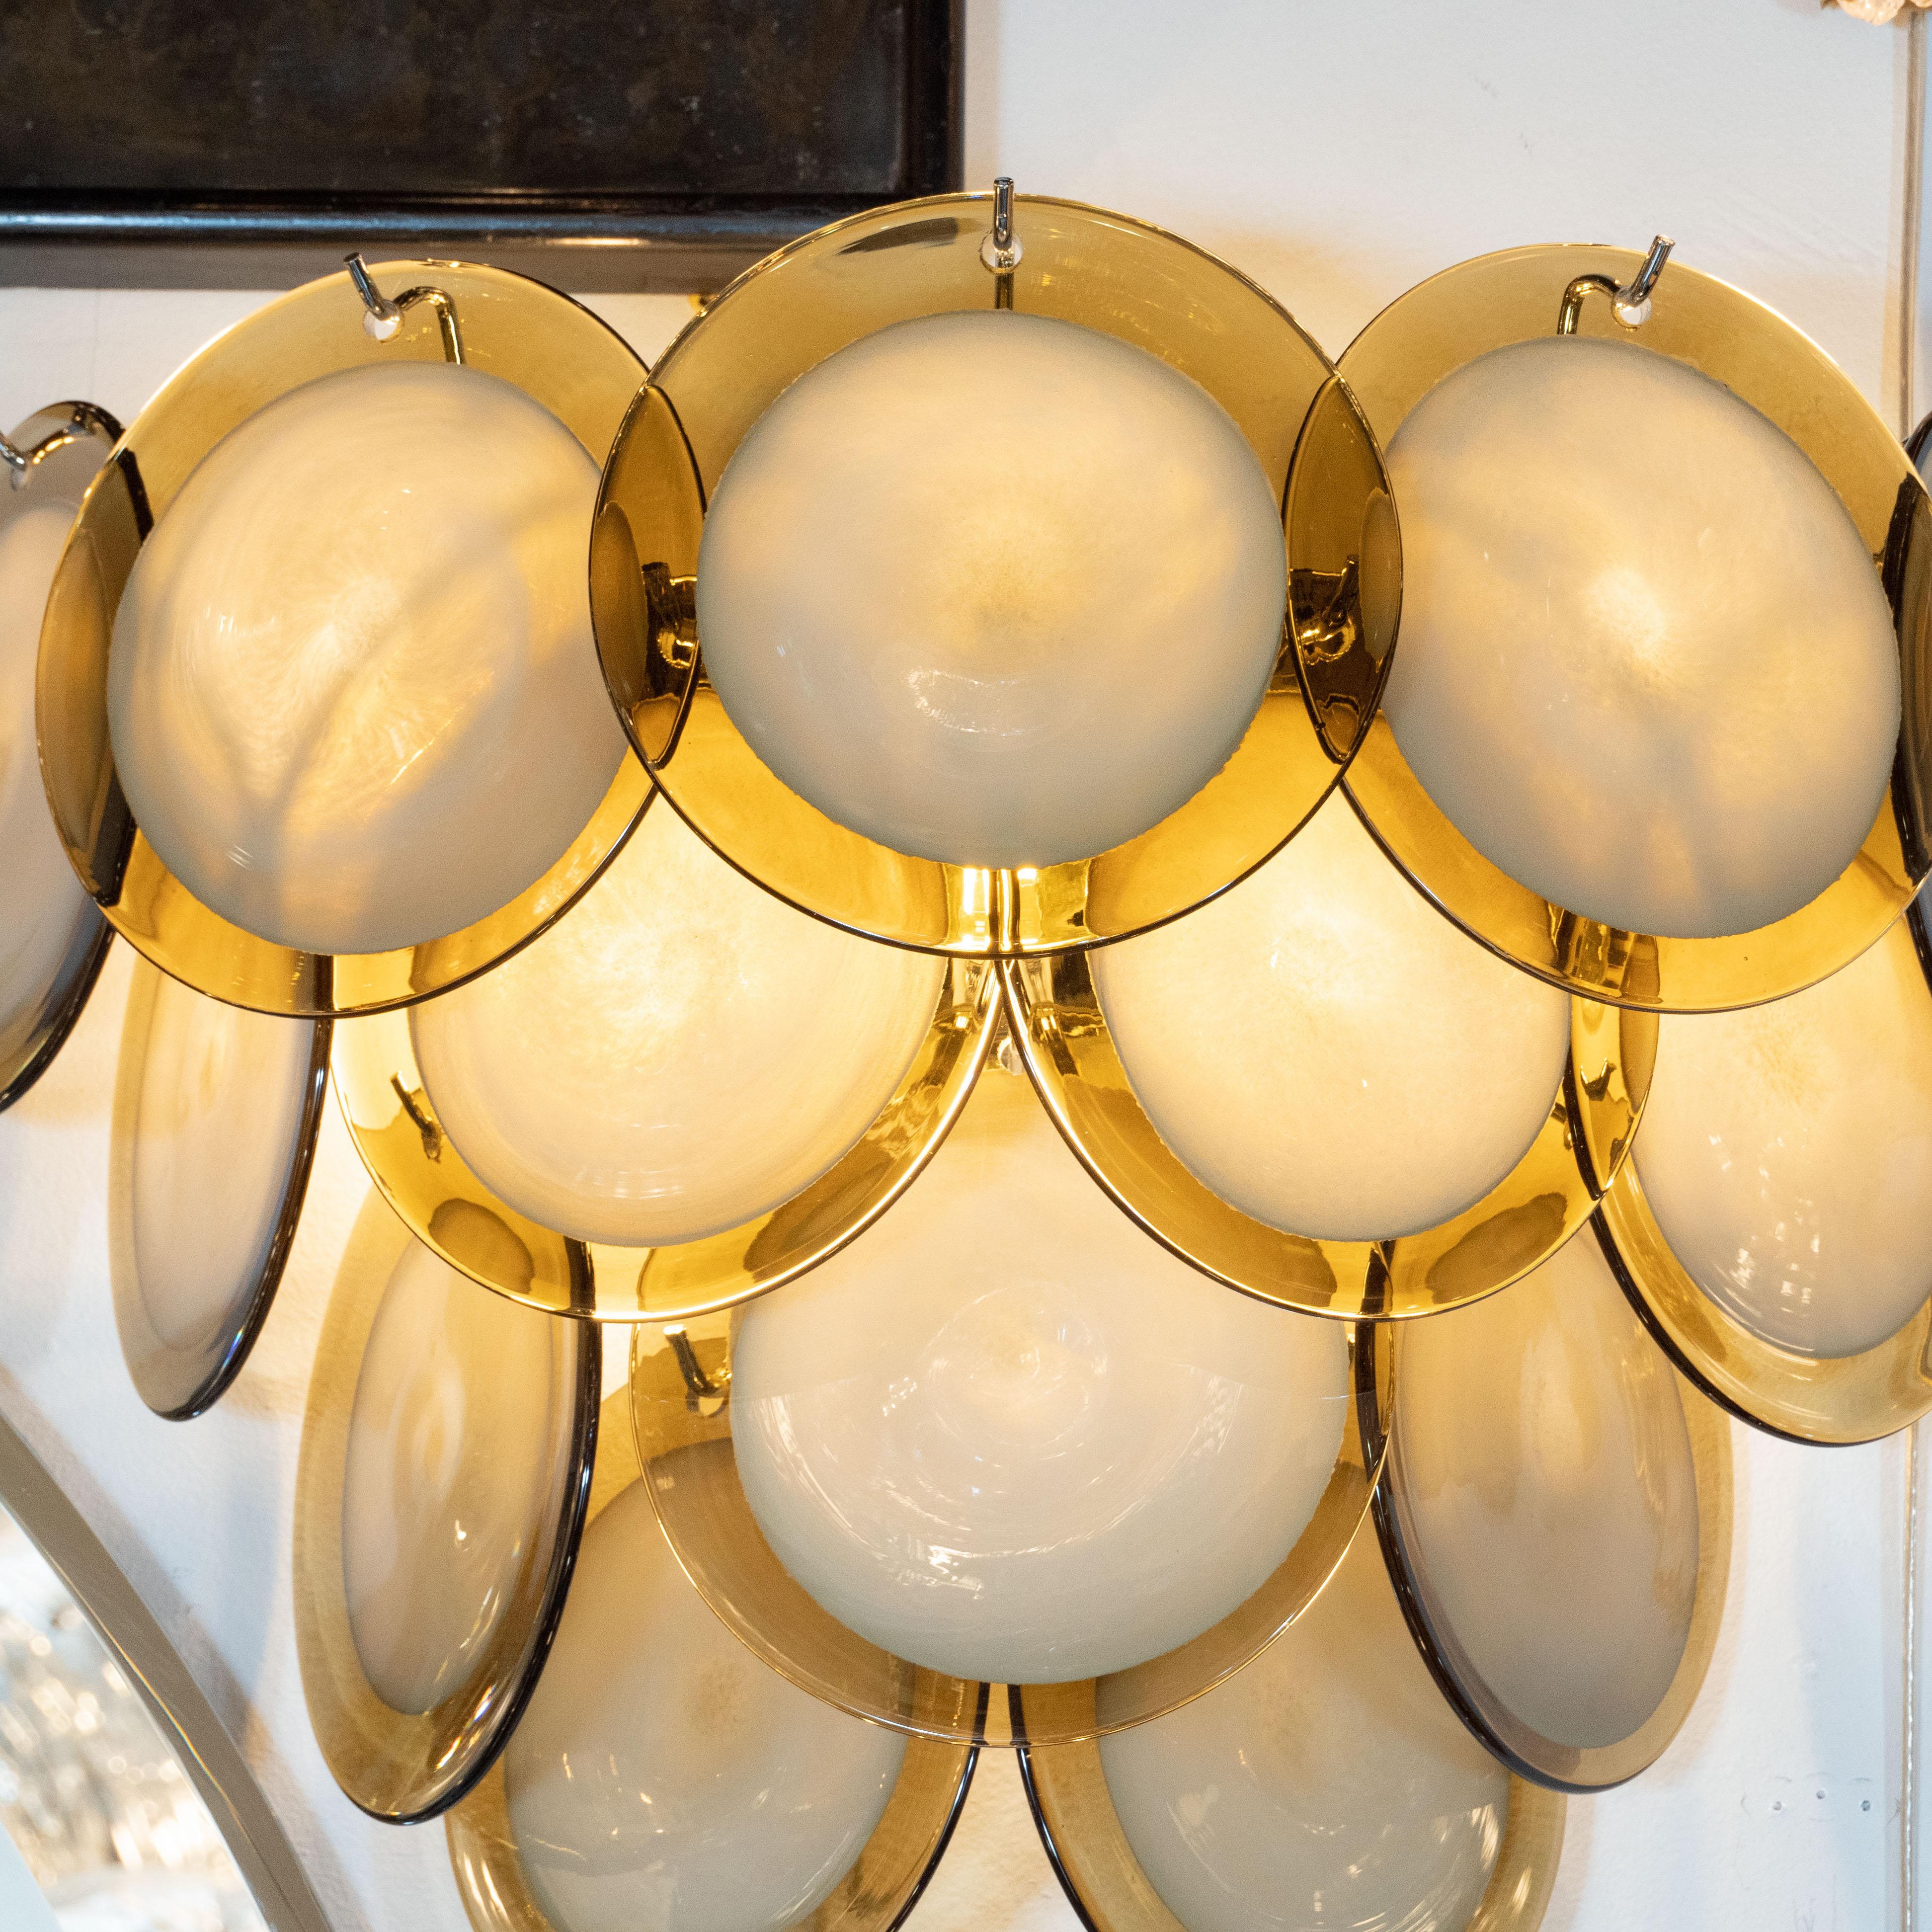 Italian Pair of Modernist 14-Disc Sconces in Handblown Murano Topaz & Translucent Glass For Sale